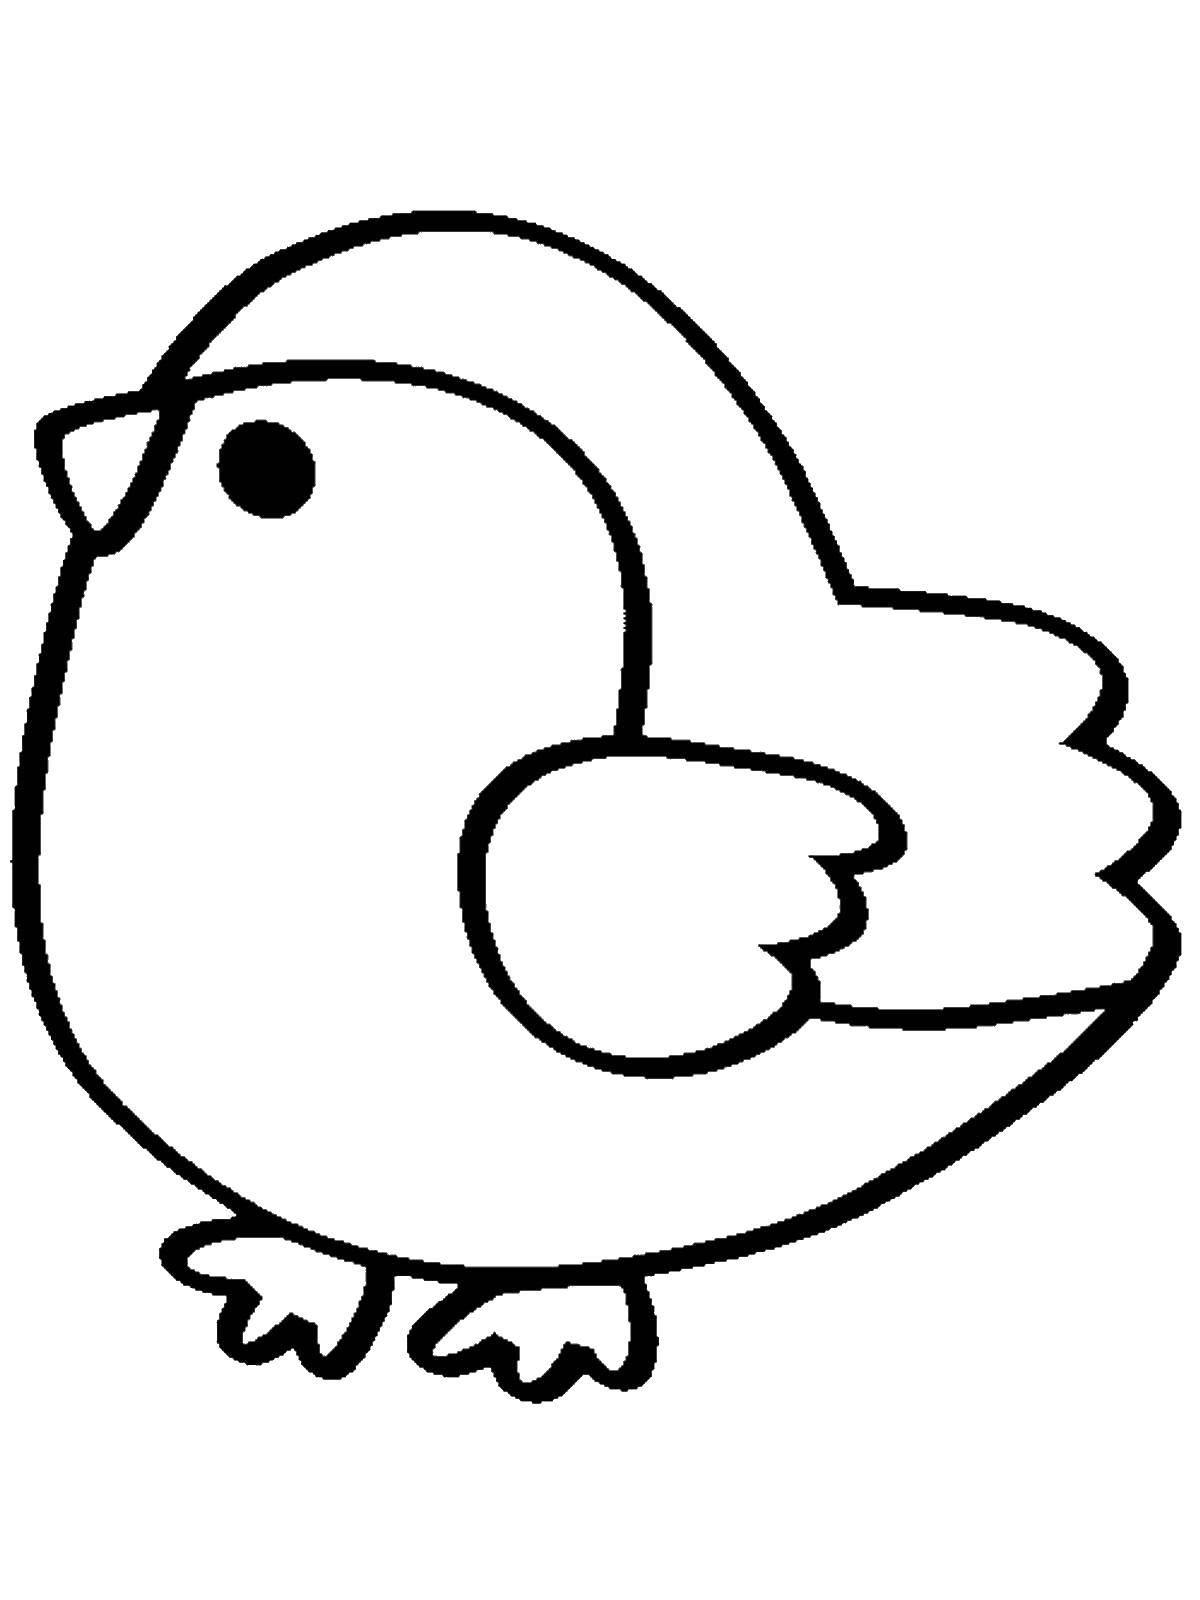 Coloring Bird. Category little ones. Tags:  bird.